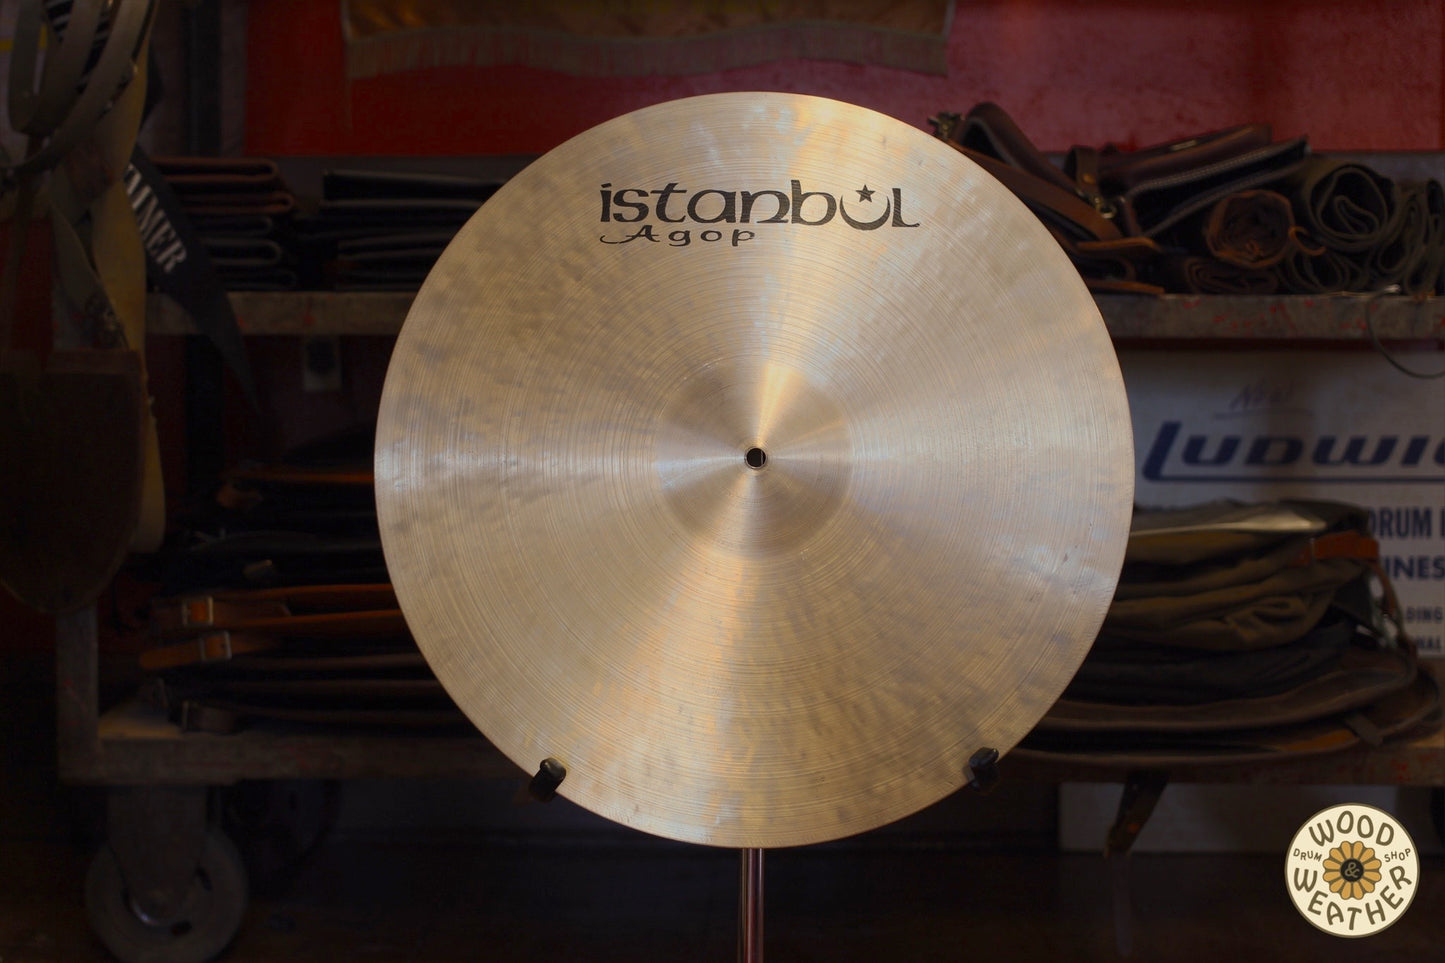 Istanbul Agop 20.5" Memphis Drum Shop 25th Anniversary Ride Cymbal 1860g - USED